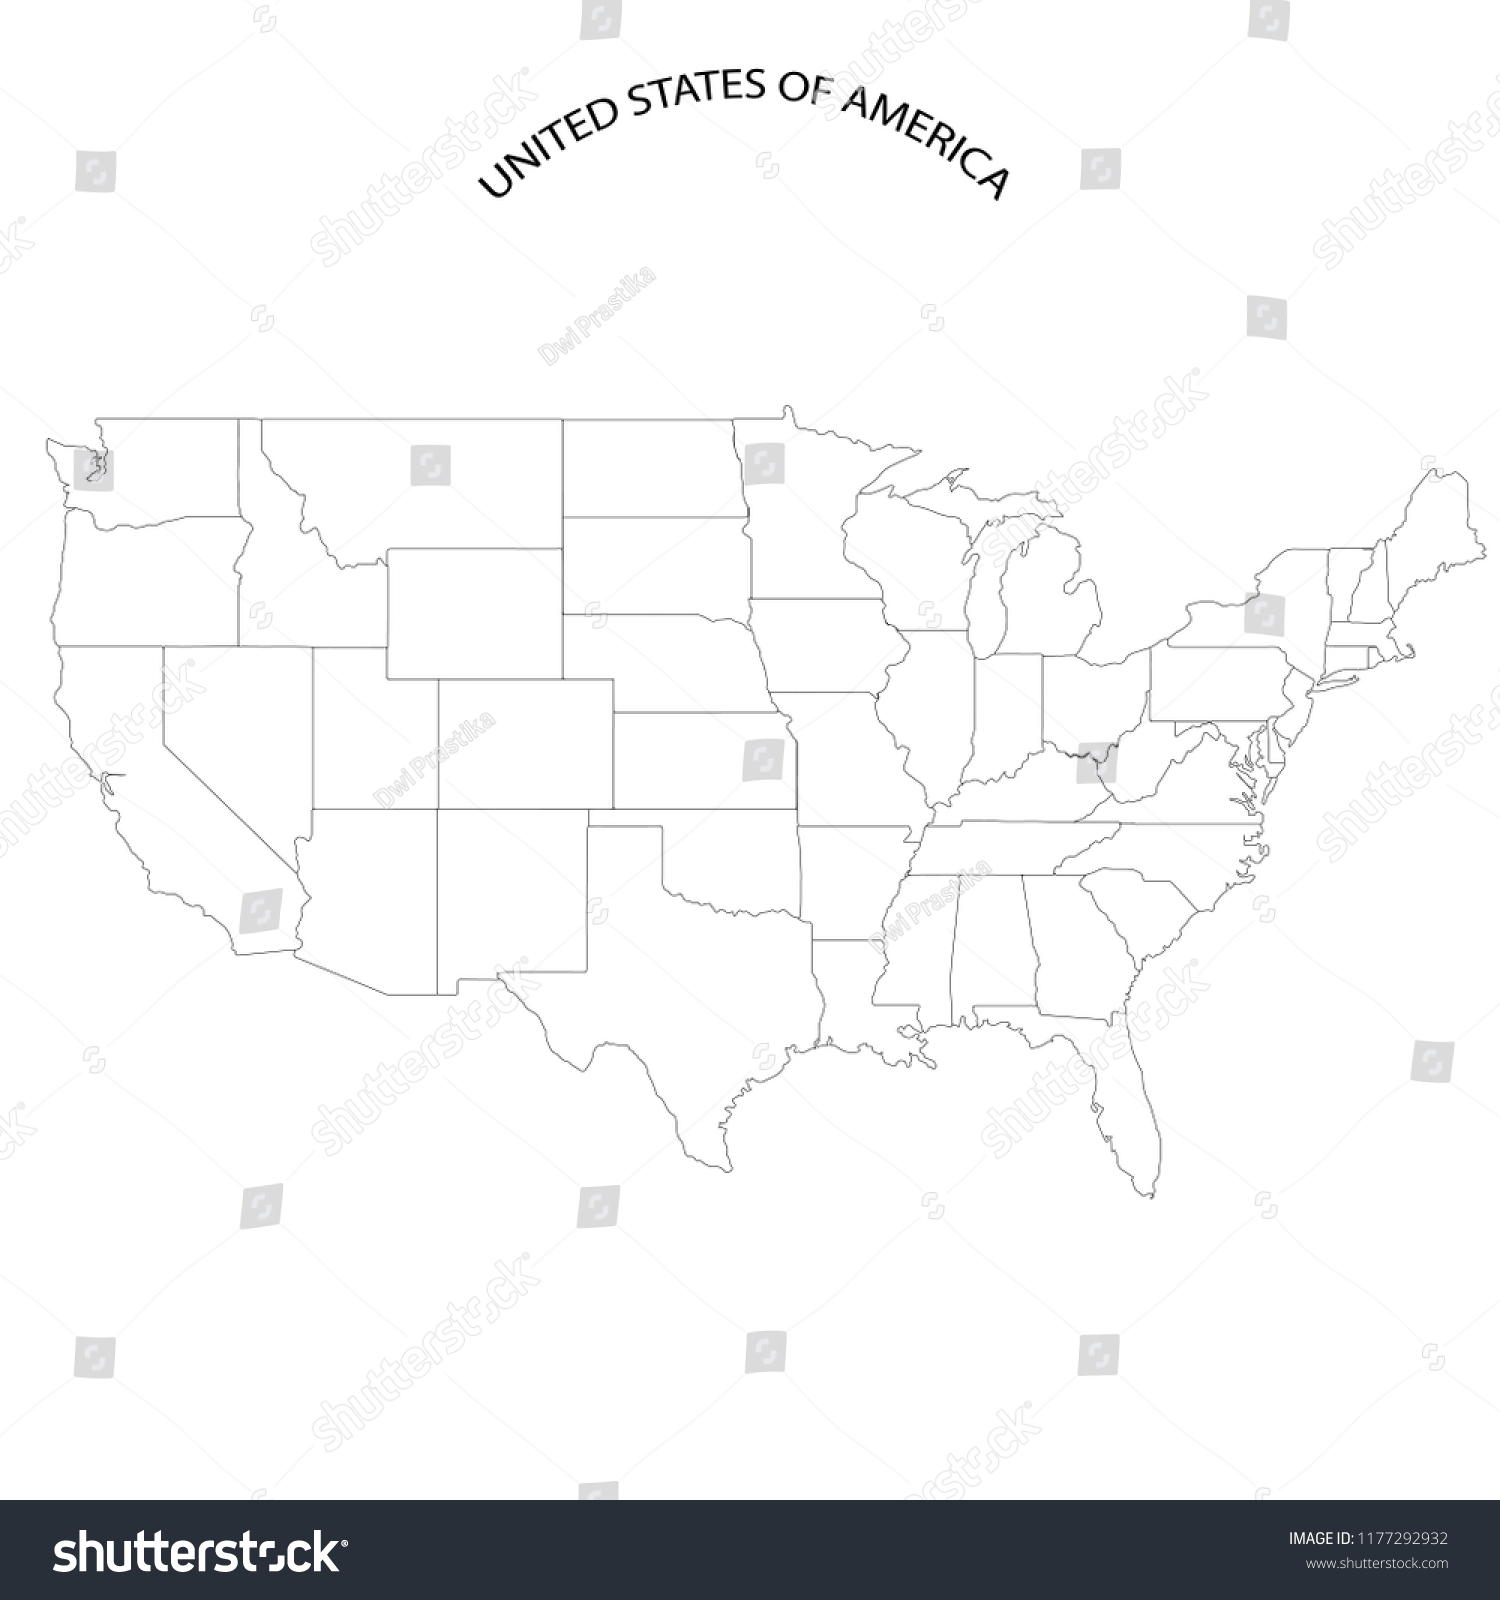 united-states-map-without-state-names-stock-vector-royalty-free